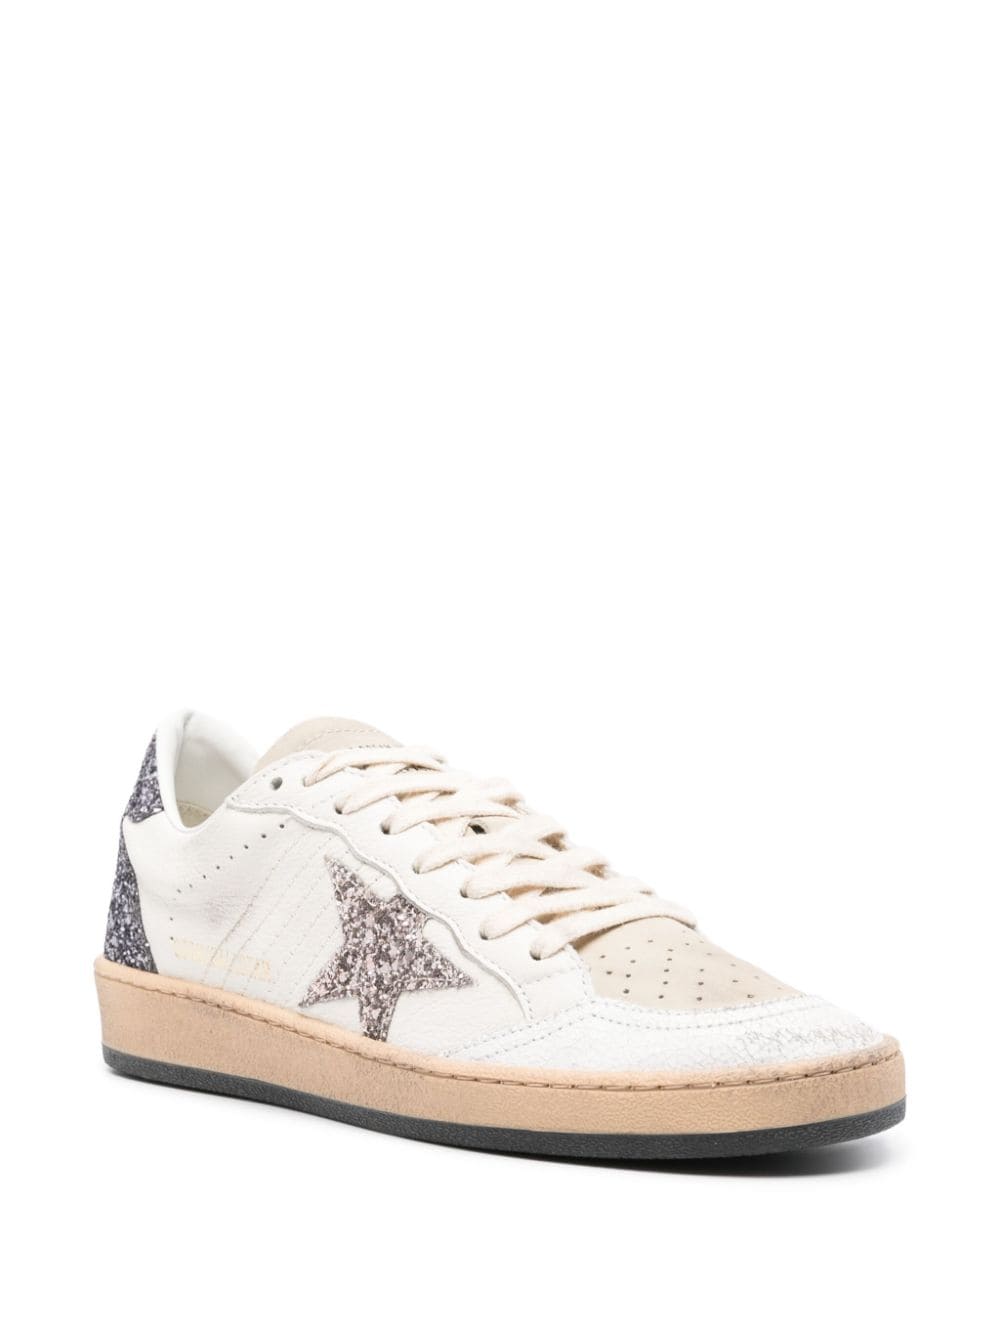 Image 2 of Golden Goose Ball Star glittered leather sneakers